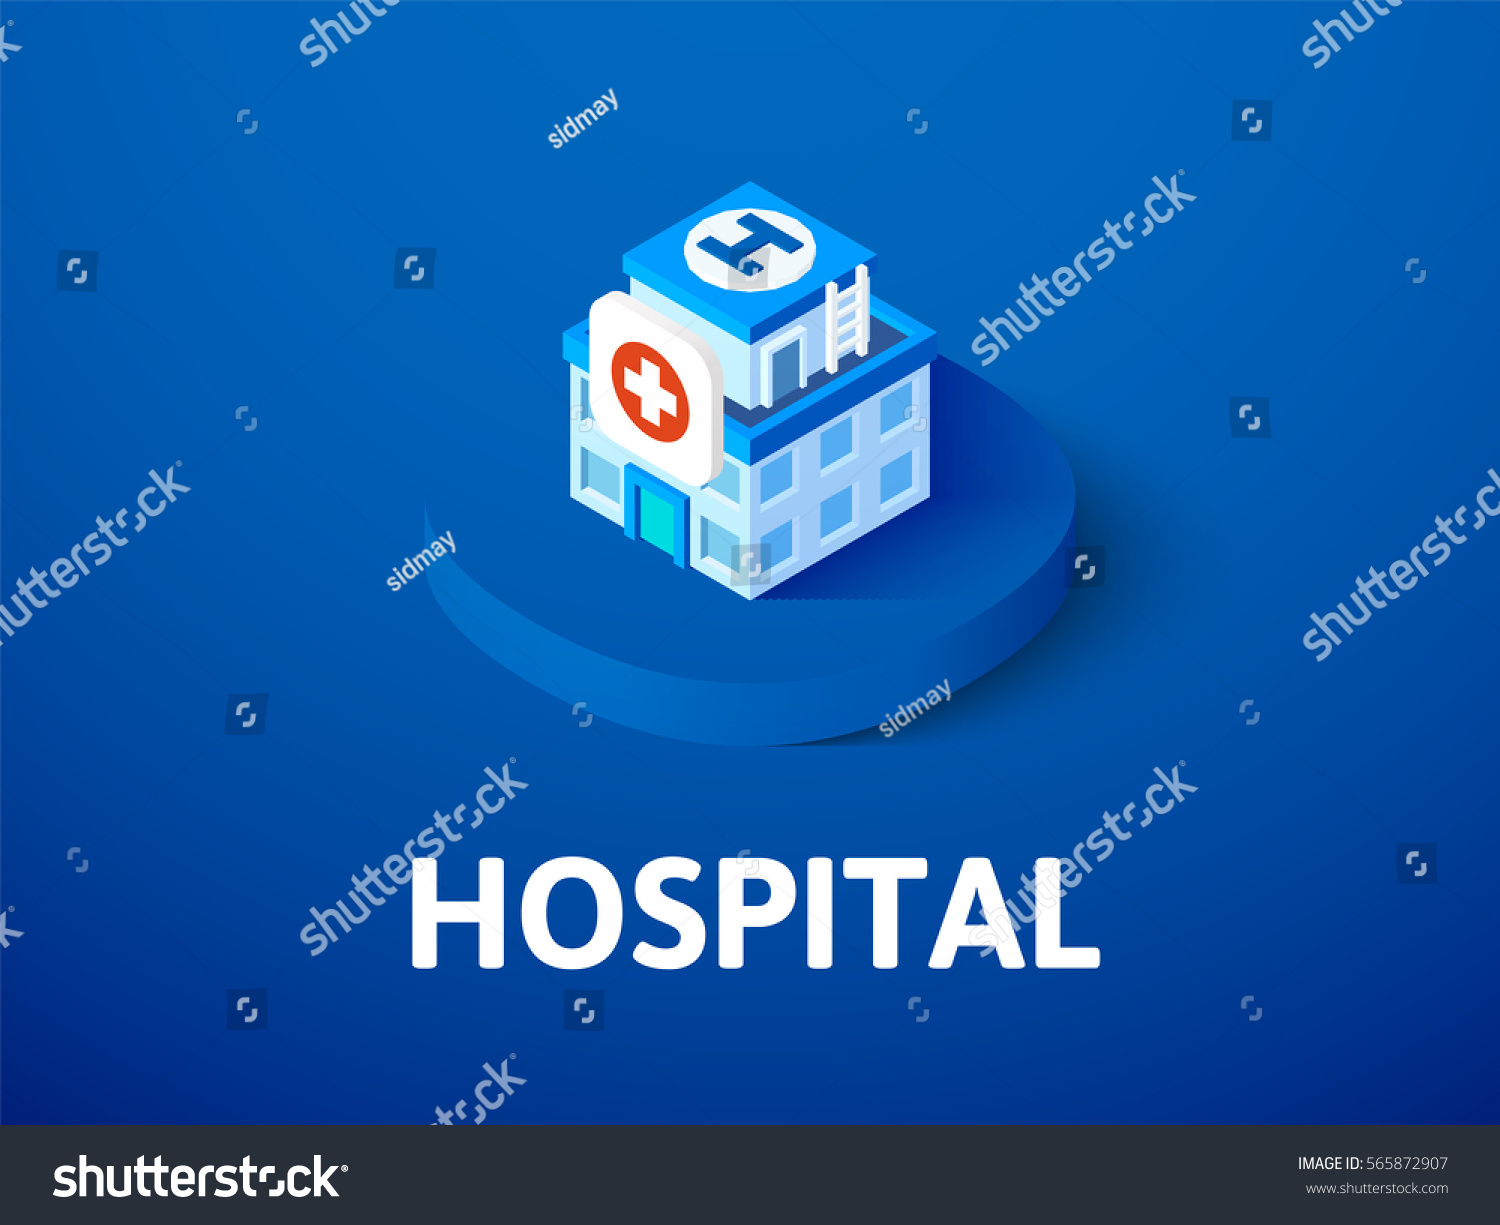 stock-vector-hospital-icon-vector-symbol-in-flat-isometric-style-isolated-on-color-background-565872907